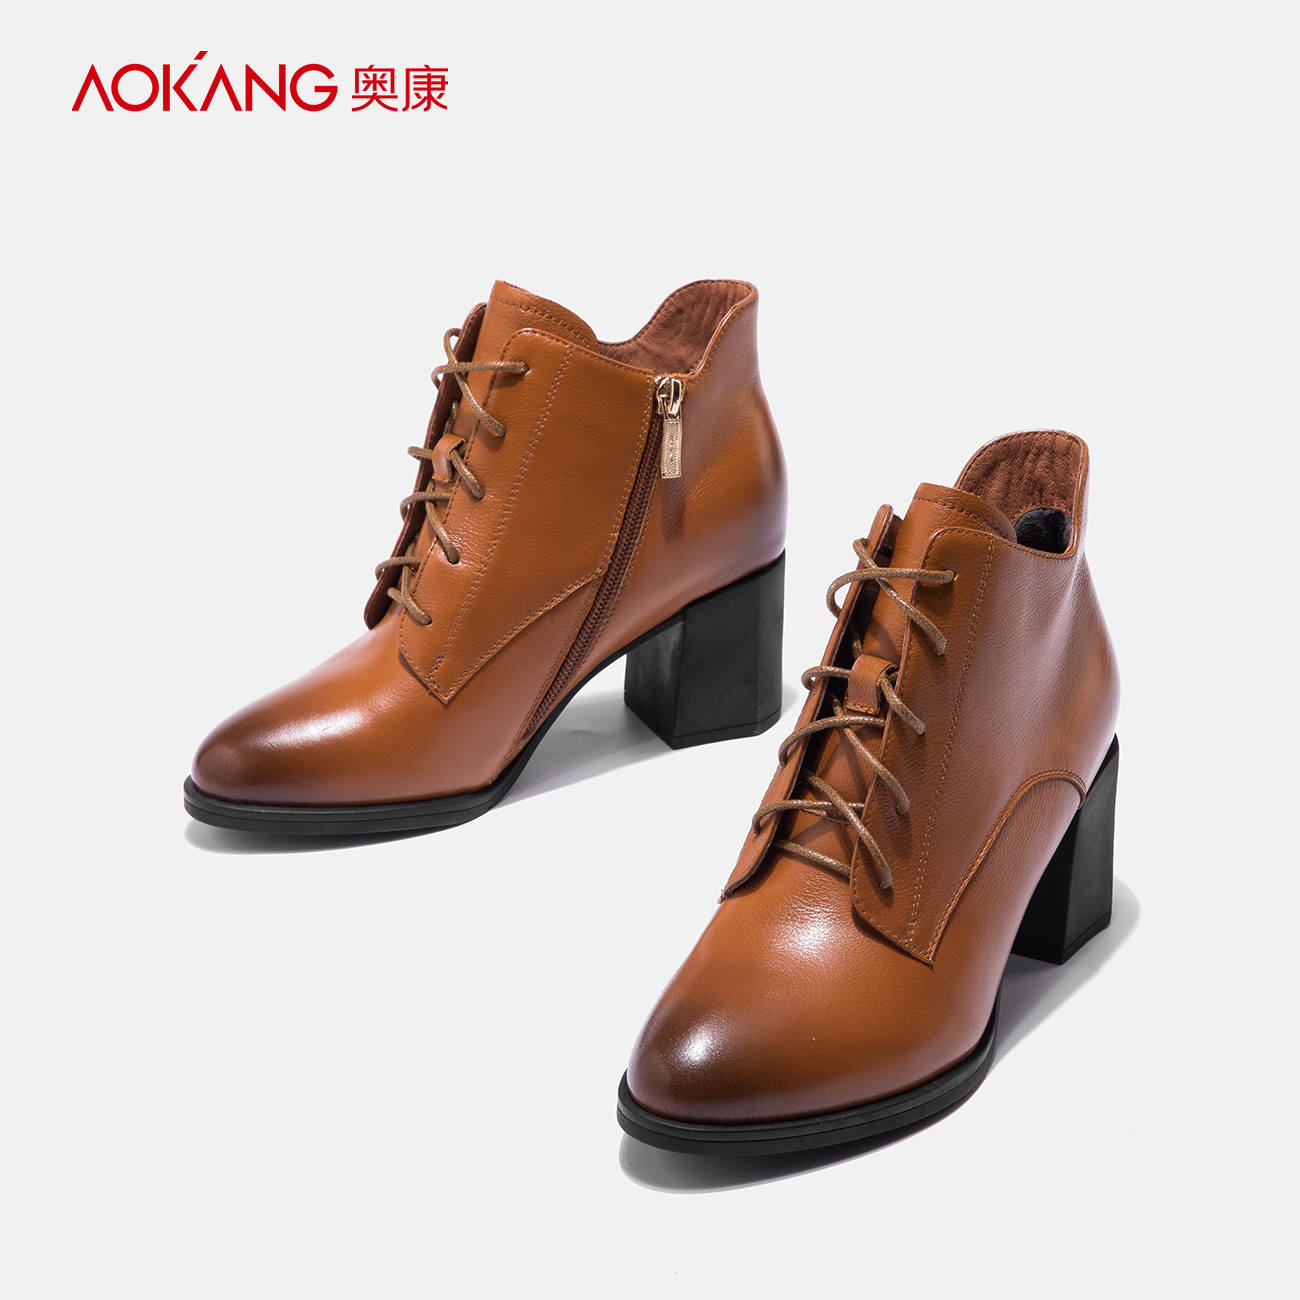 Aokang women's shoes 2018 winter new leather thick high-heeled fashion women's boots rub color European and American style Martin boots short boots